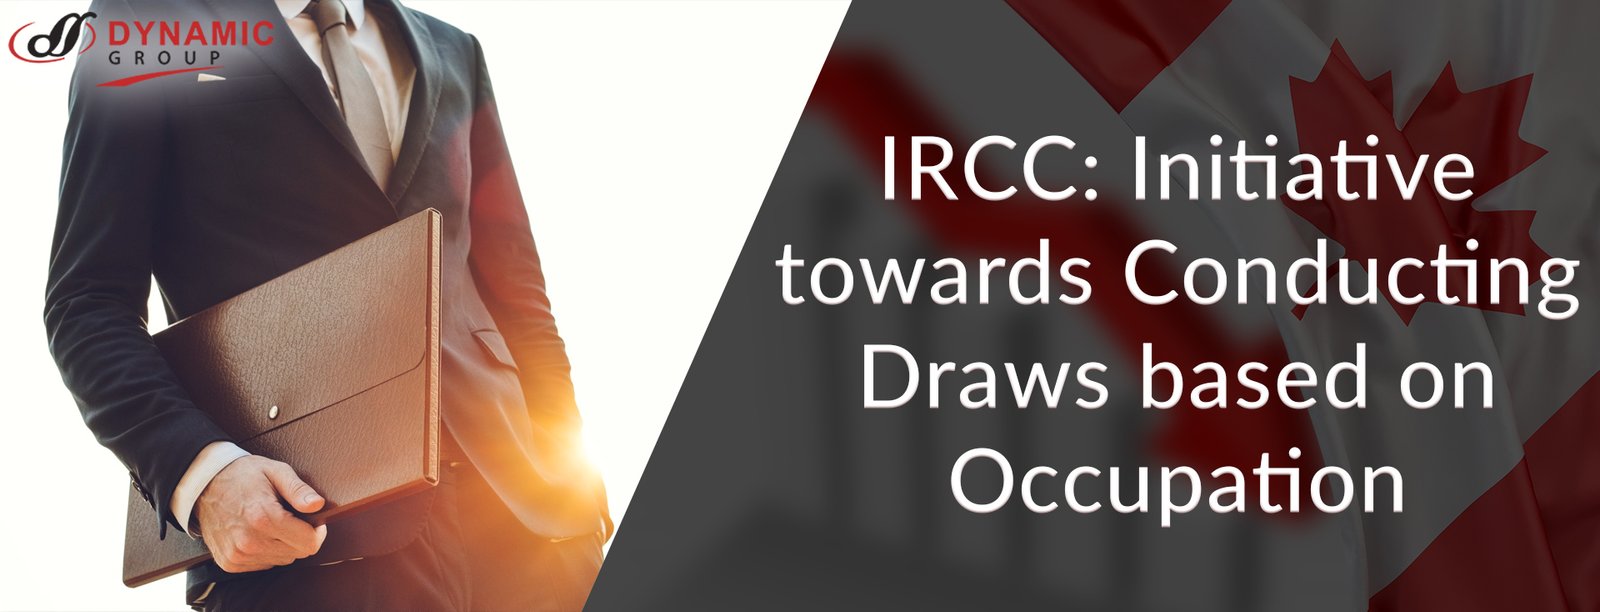 IRCC: Initiative towards Conducting Draws based on Occupation